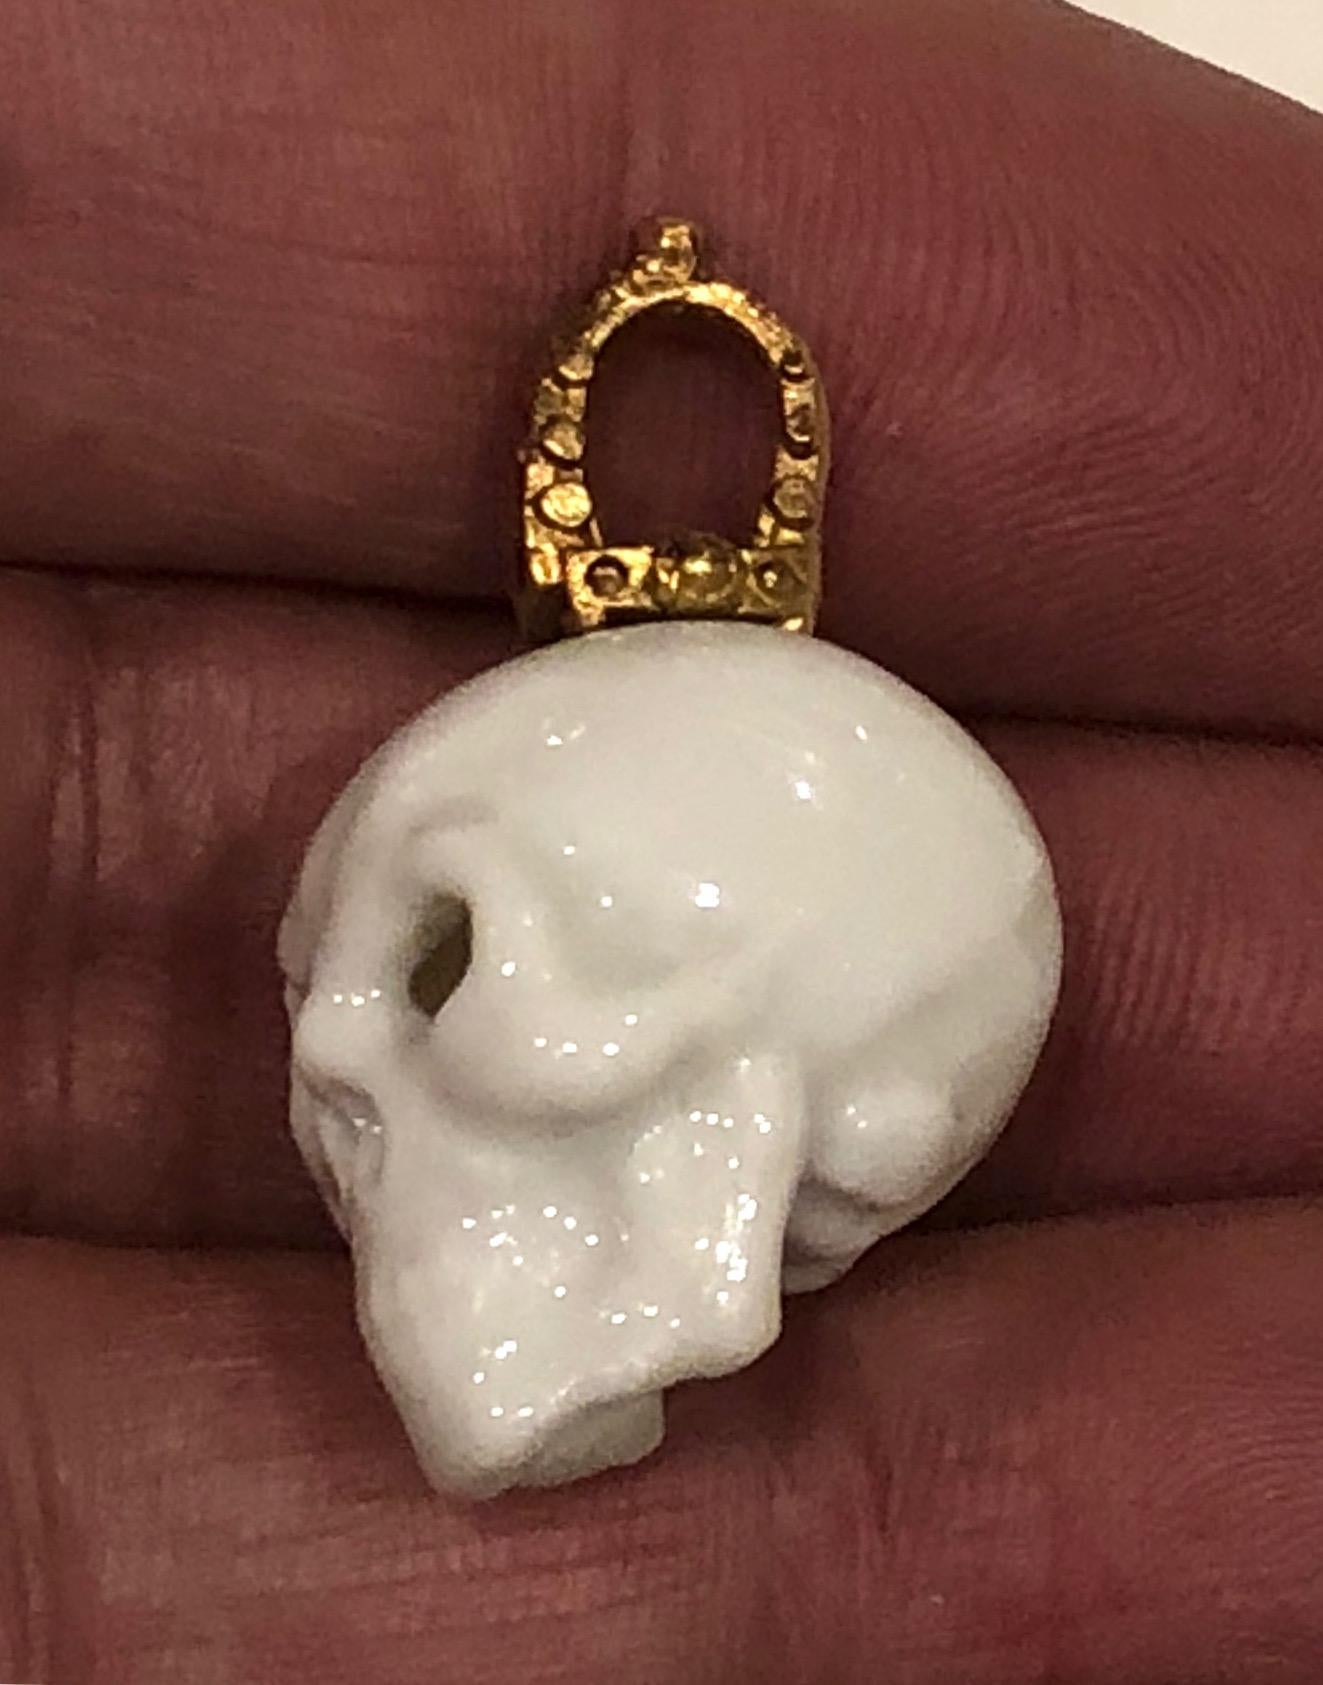 Skull pendant in Rosenthal porcelain with 18k gold and set rubies.
Stamped